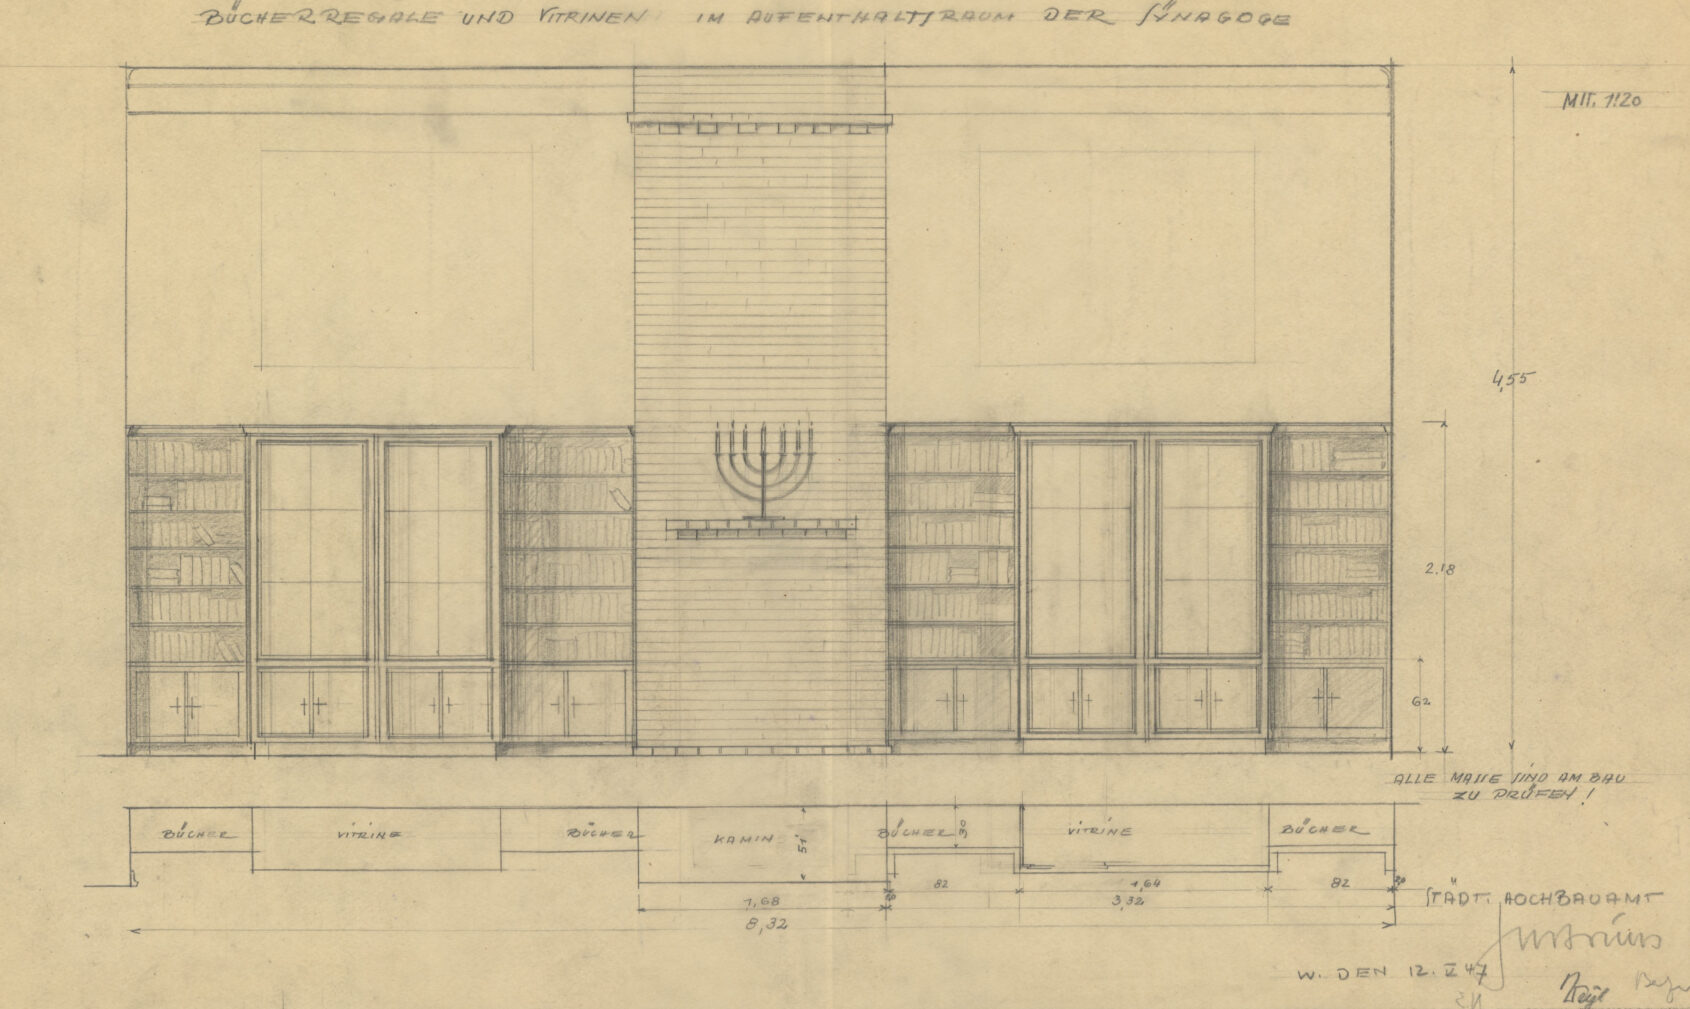 Construction drawing of the Hochbauamt, fireplace wall in the club room with display cases and bookshelves, September 22, 1947. StadtA WI, ArpRi No. 3